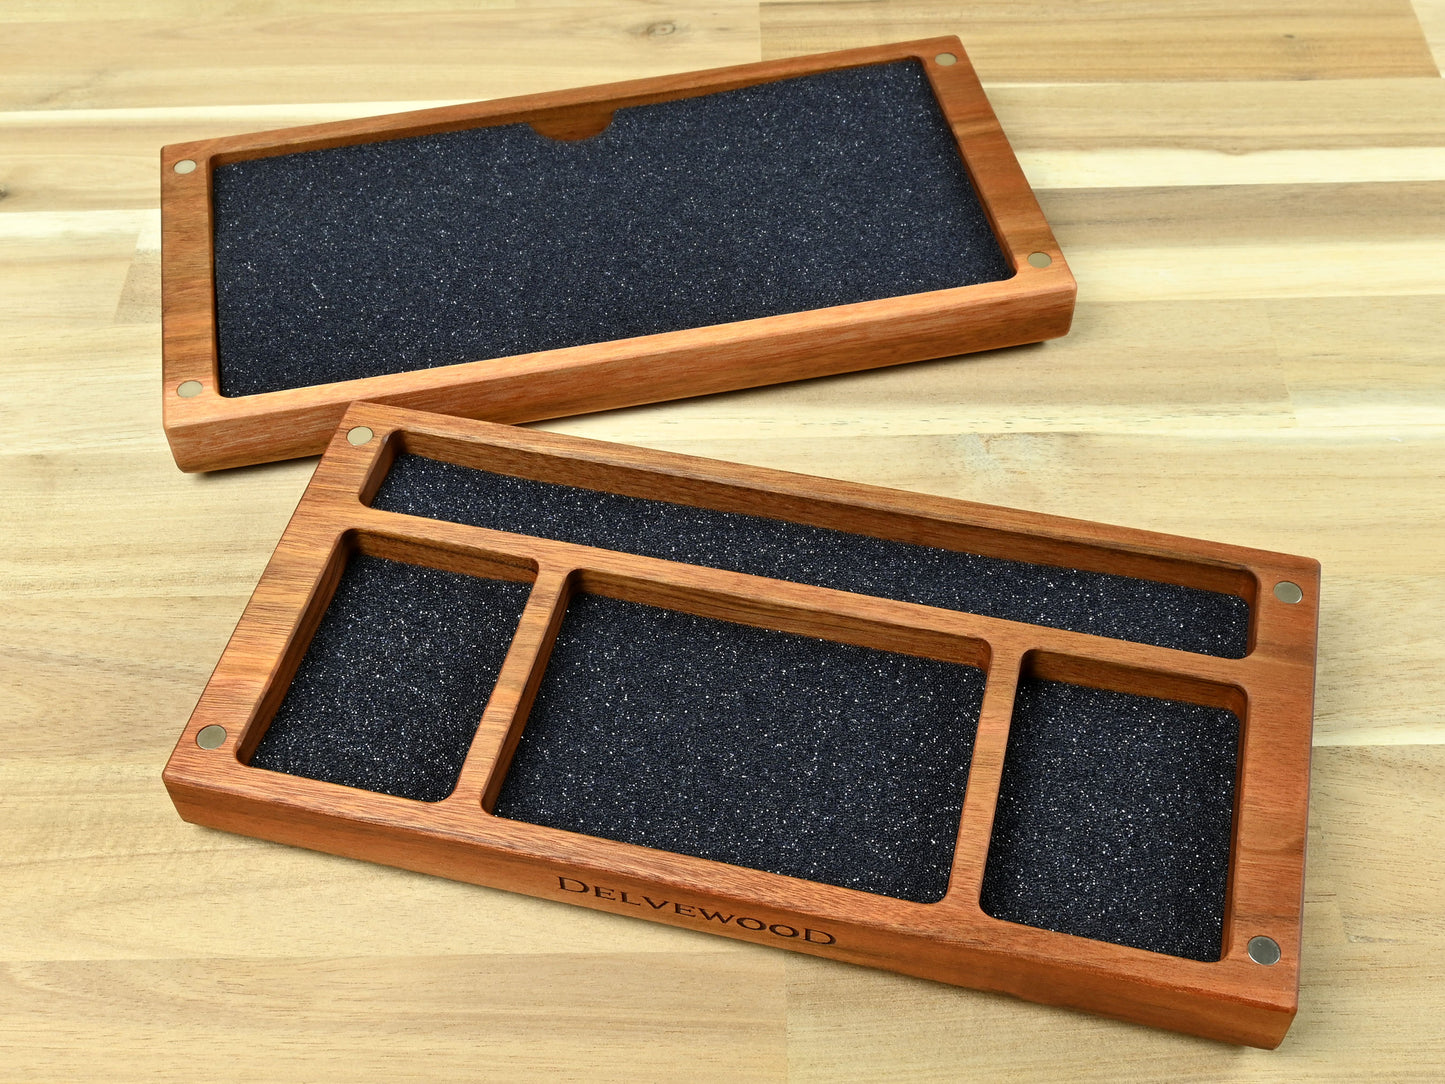 Patagonian Rosewood Delver's kit dice box and tray for dnd rpg